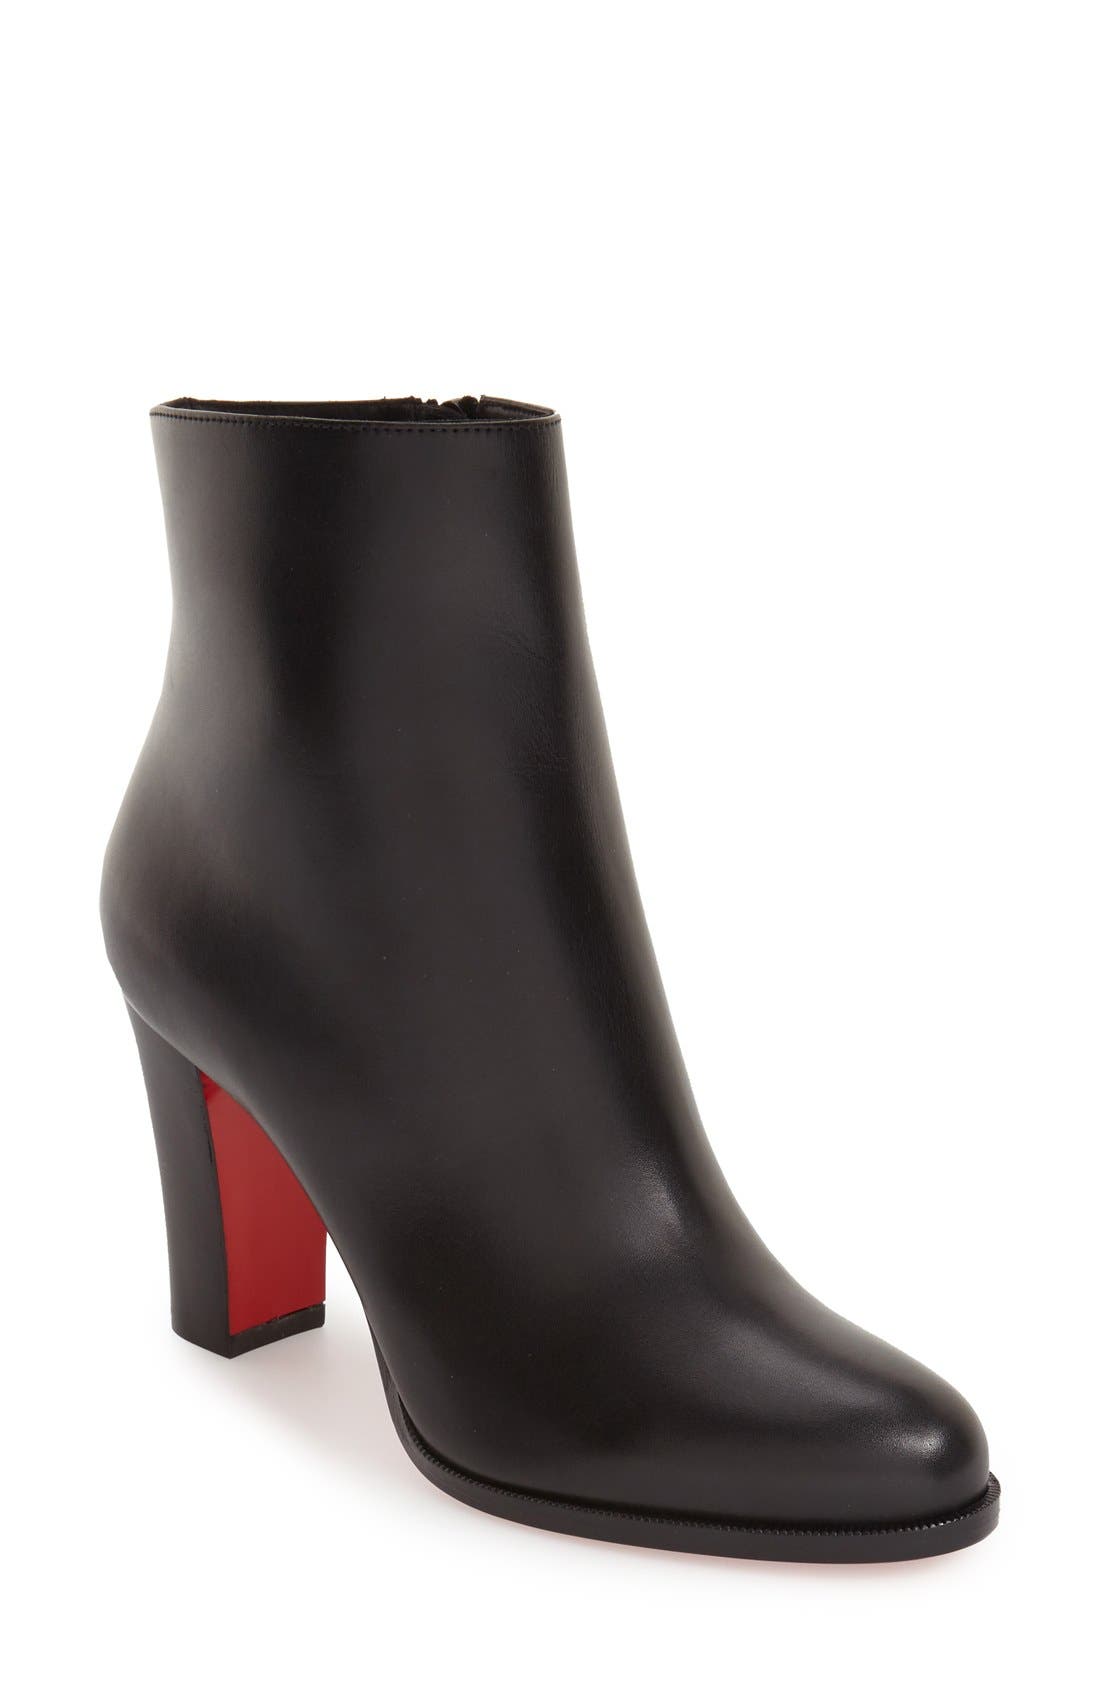 nordstrom louboutin boots